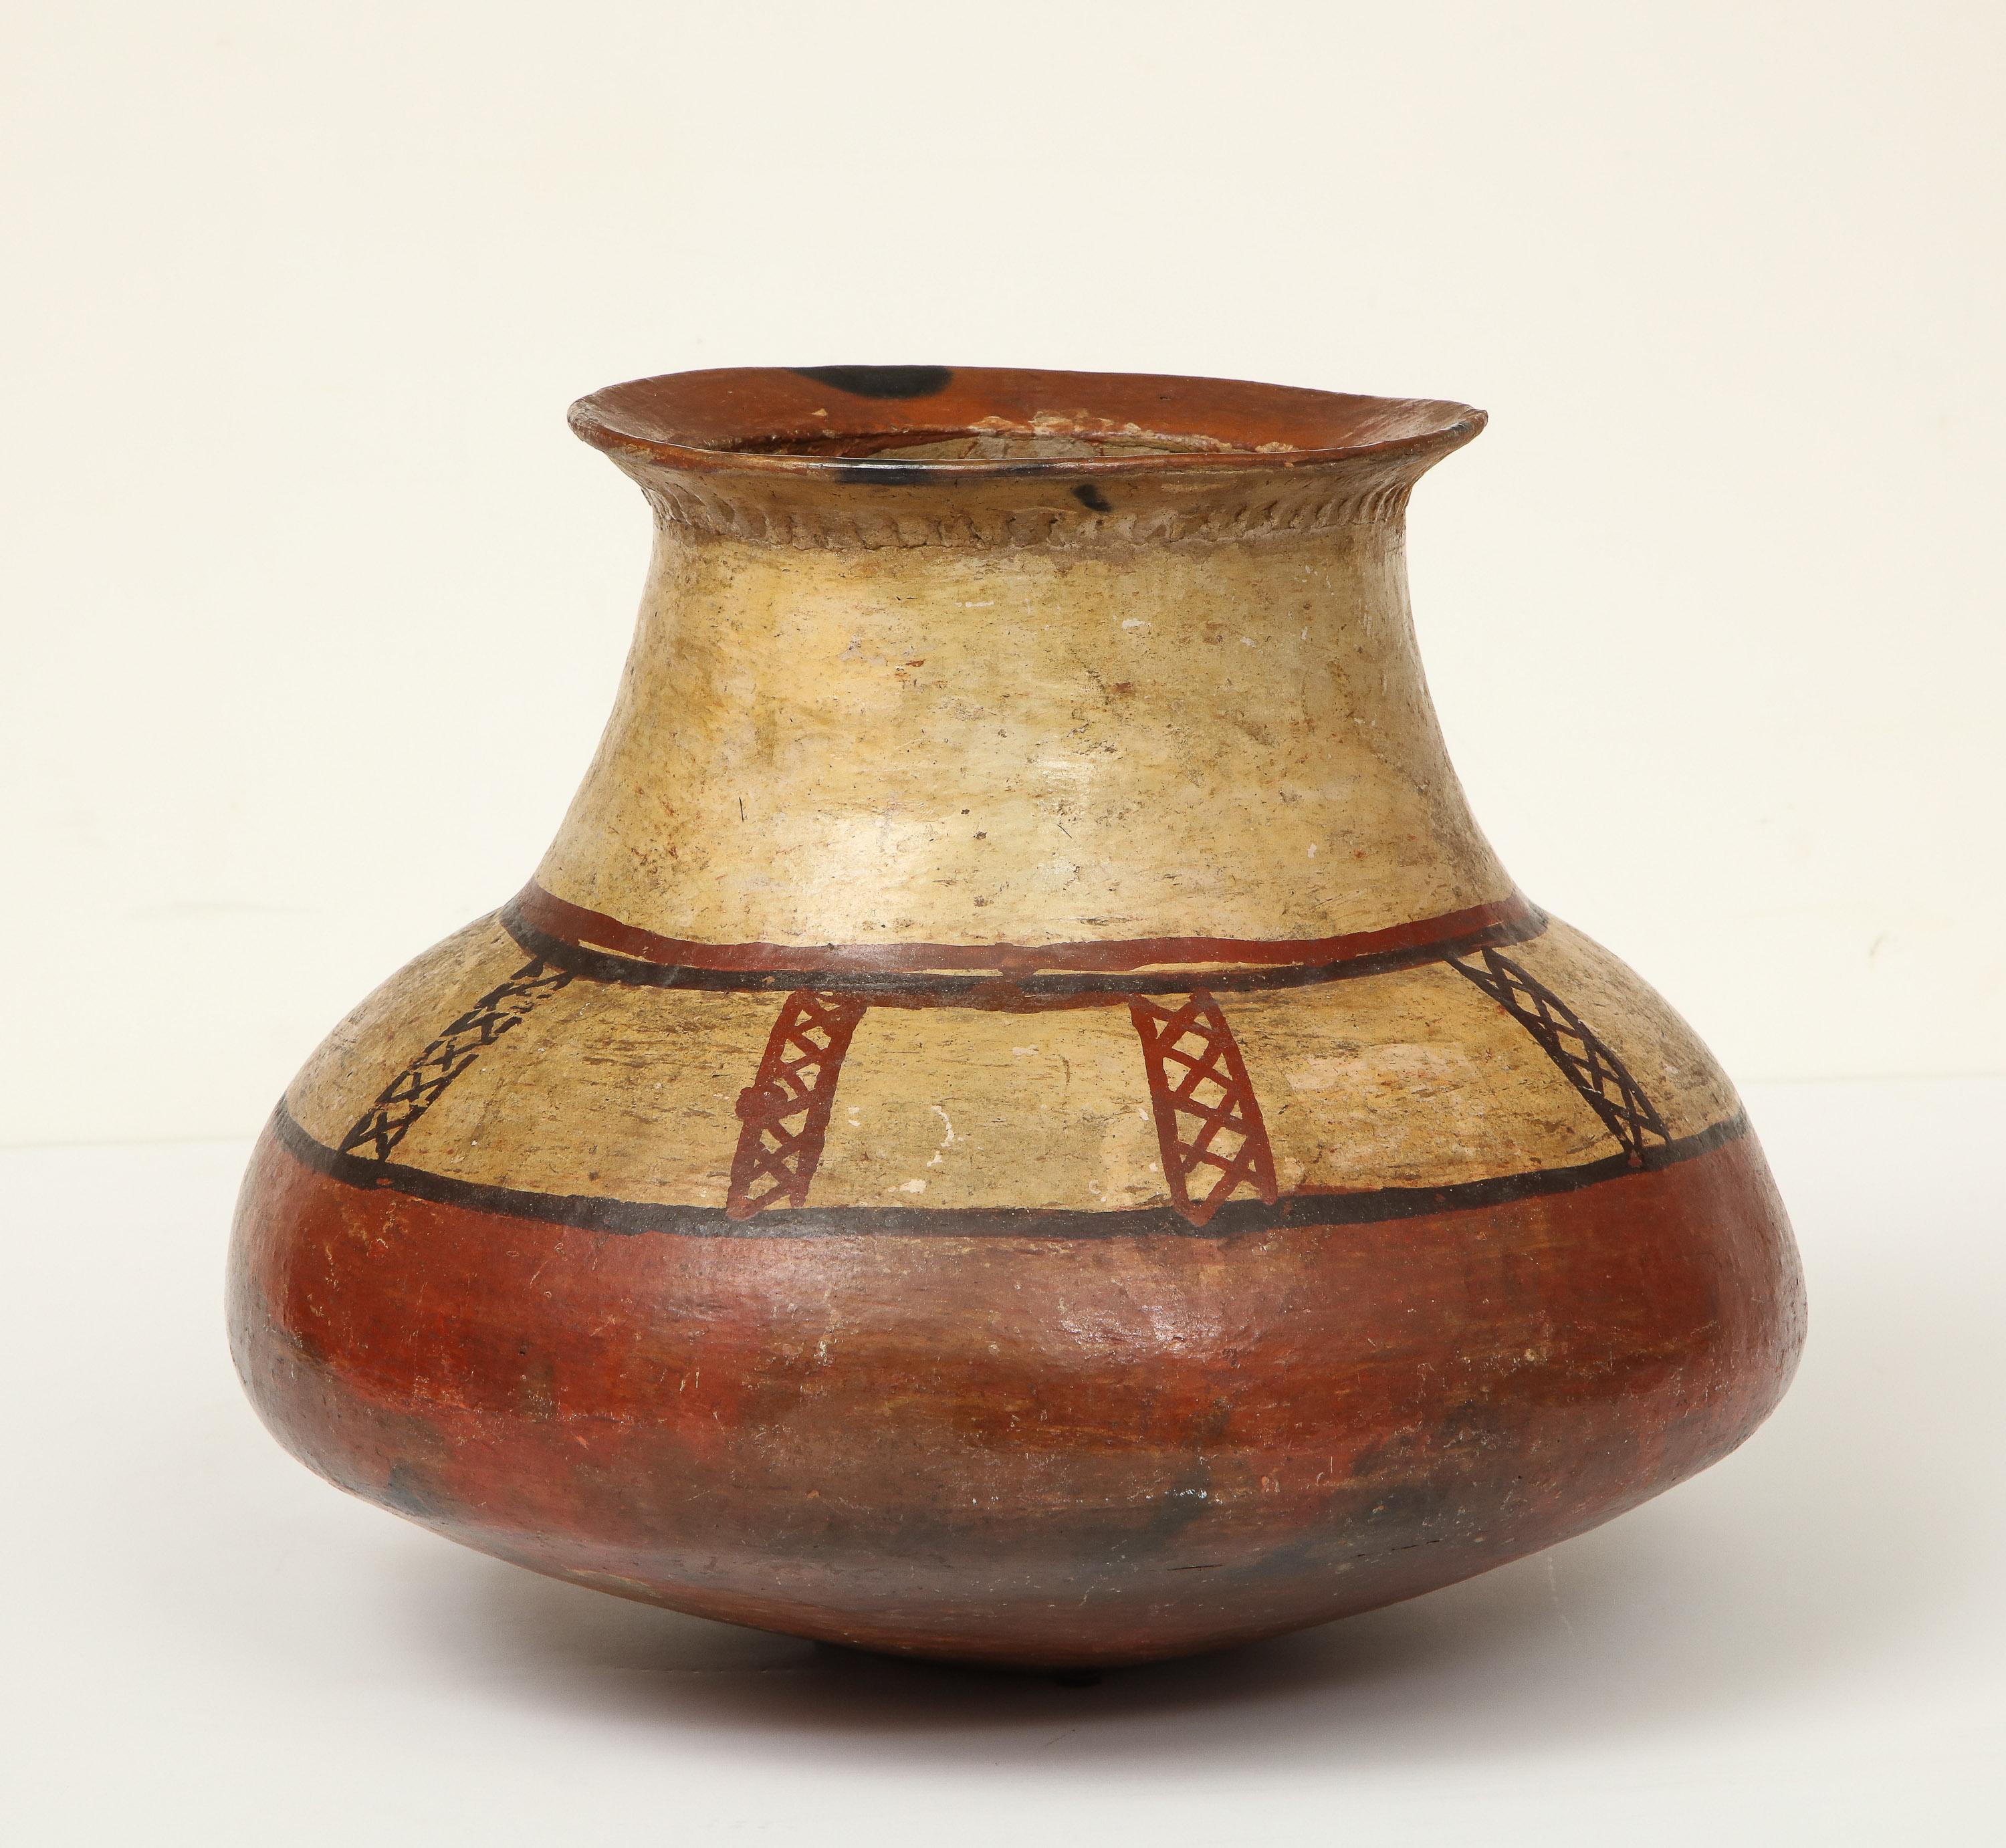 South American Pottery Bowl from the Andes